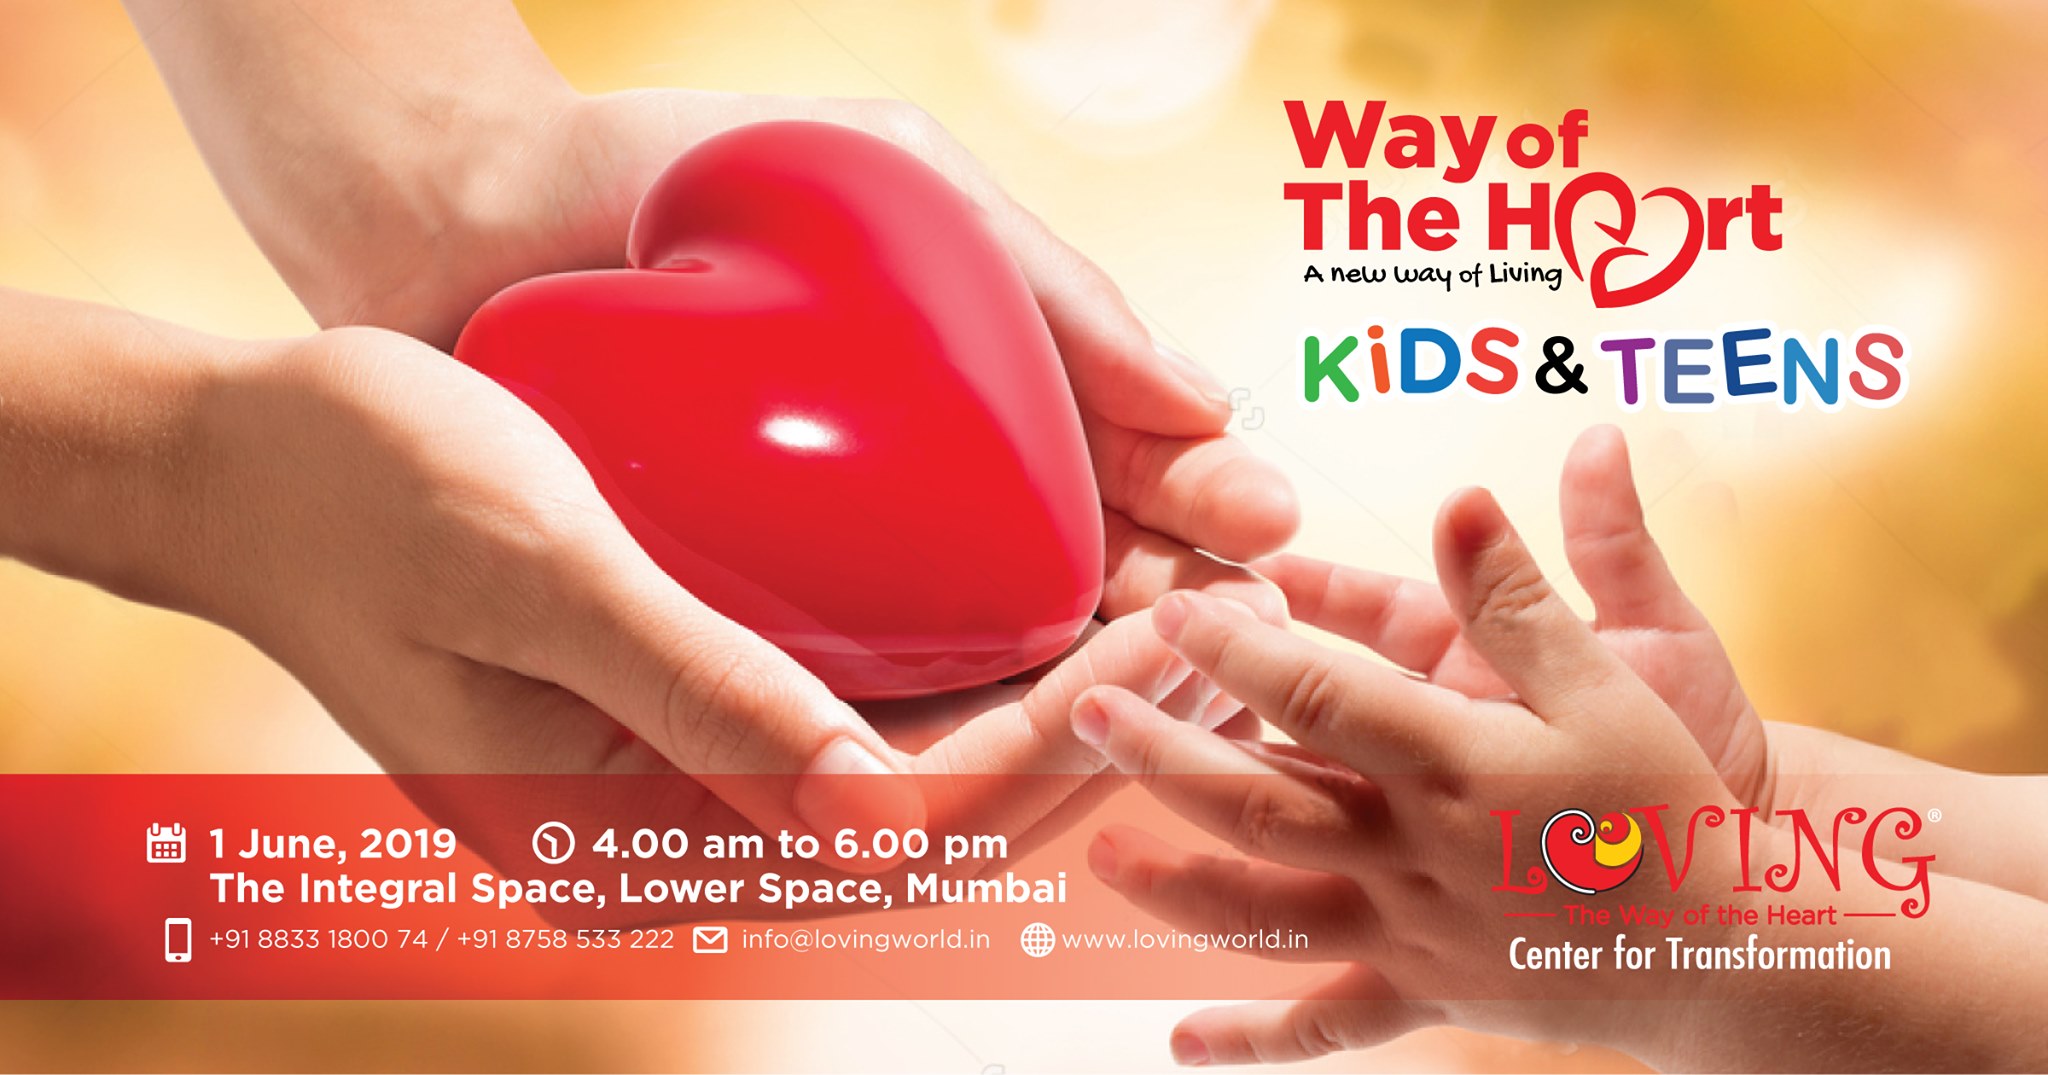 Way of the Heart for Kids & Teens